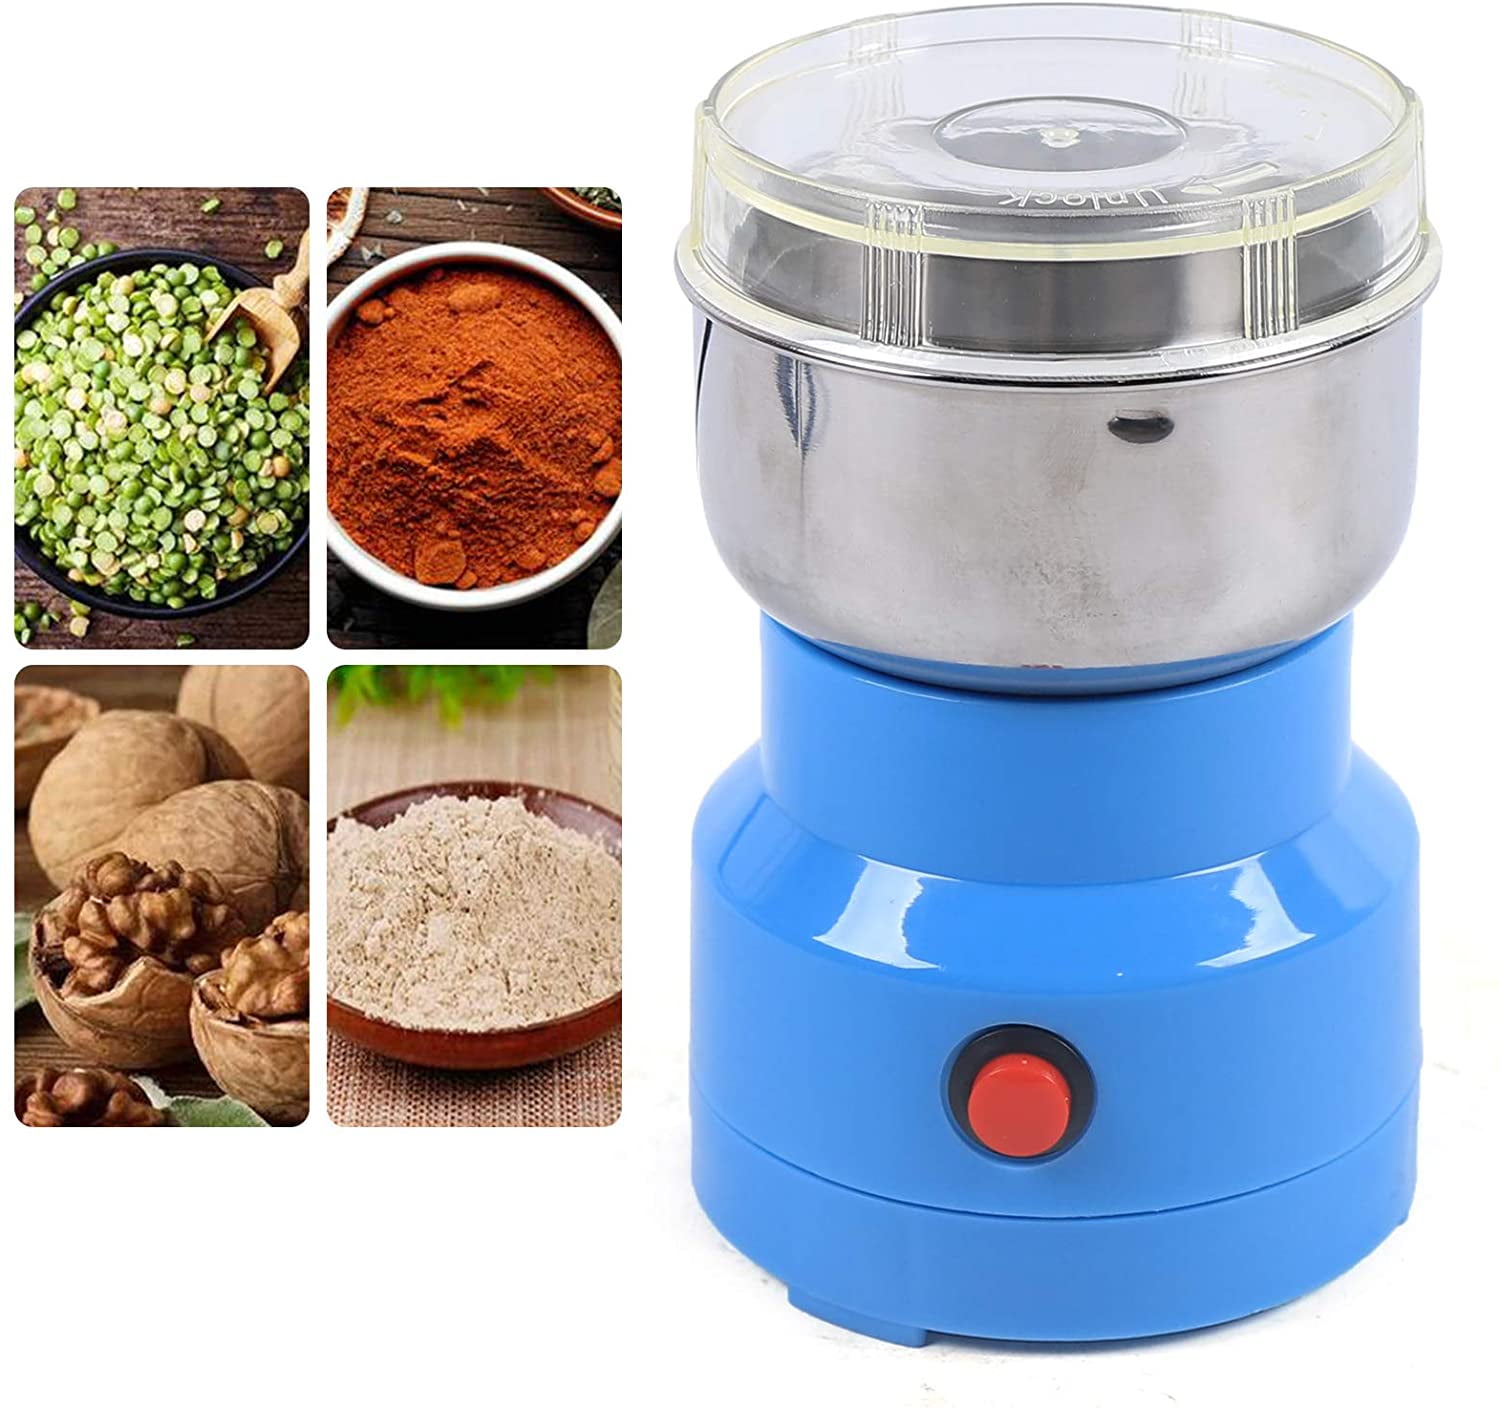 Spice Grinding Herbs/Spices/Nuts/Grains/Coffee Bean Grinding Multifunction Smash Machine Electric Mini Household Grindernut Grinding Machine 